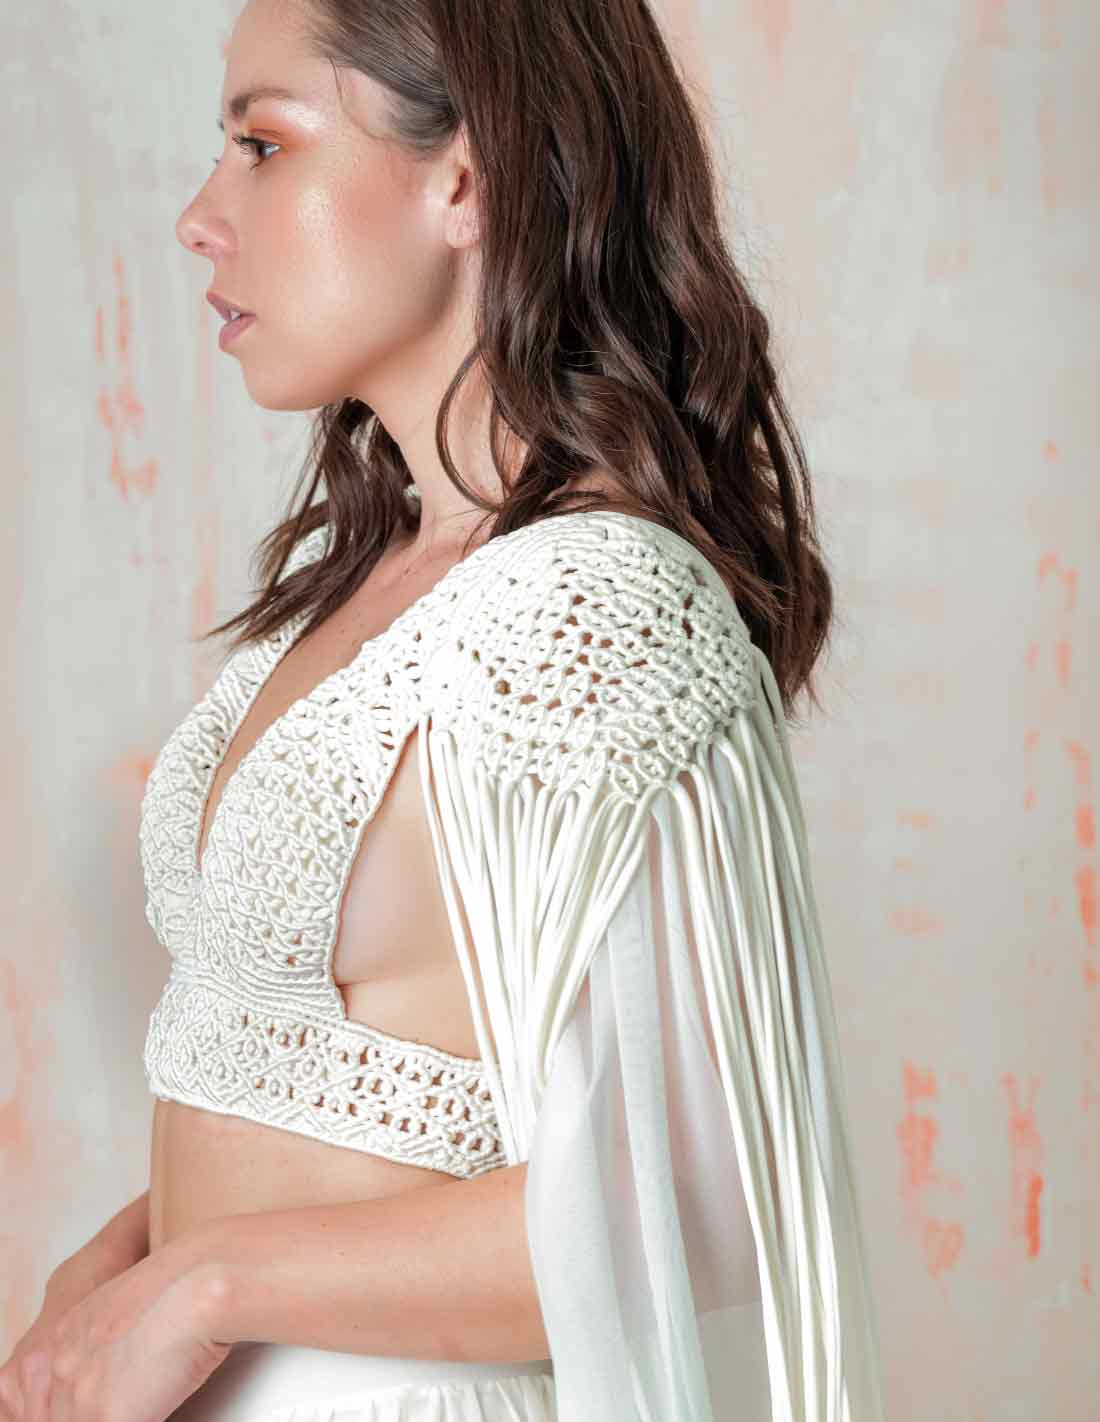 Pluie Shoulder Pads Ivory. Shoulder Pads With Hand Woven Macramé In Ivory. Entreaguas